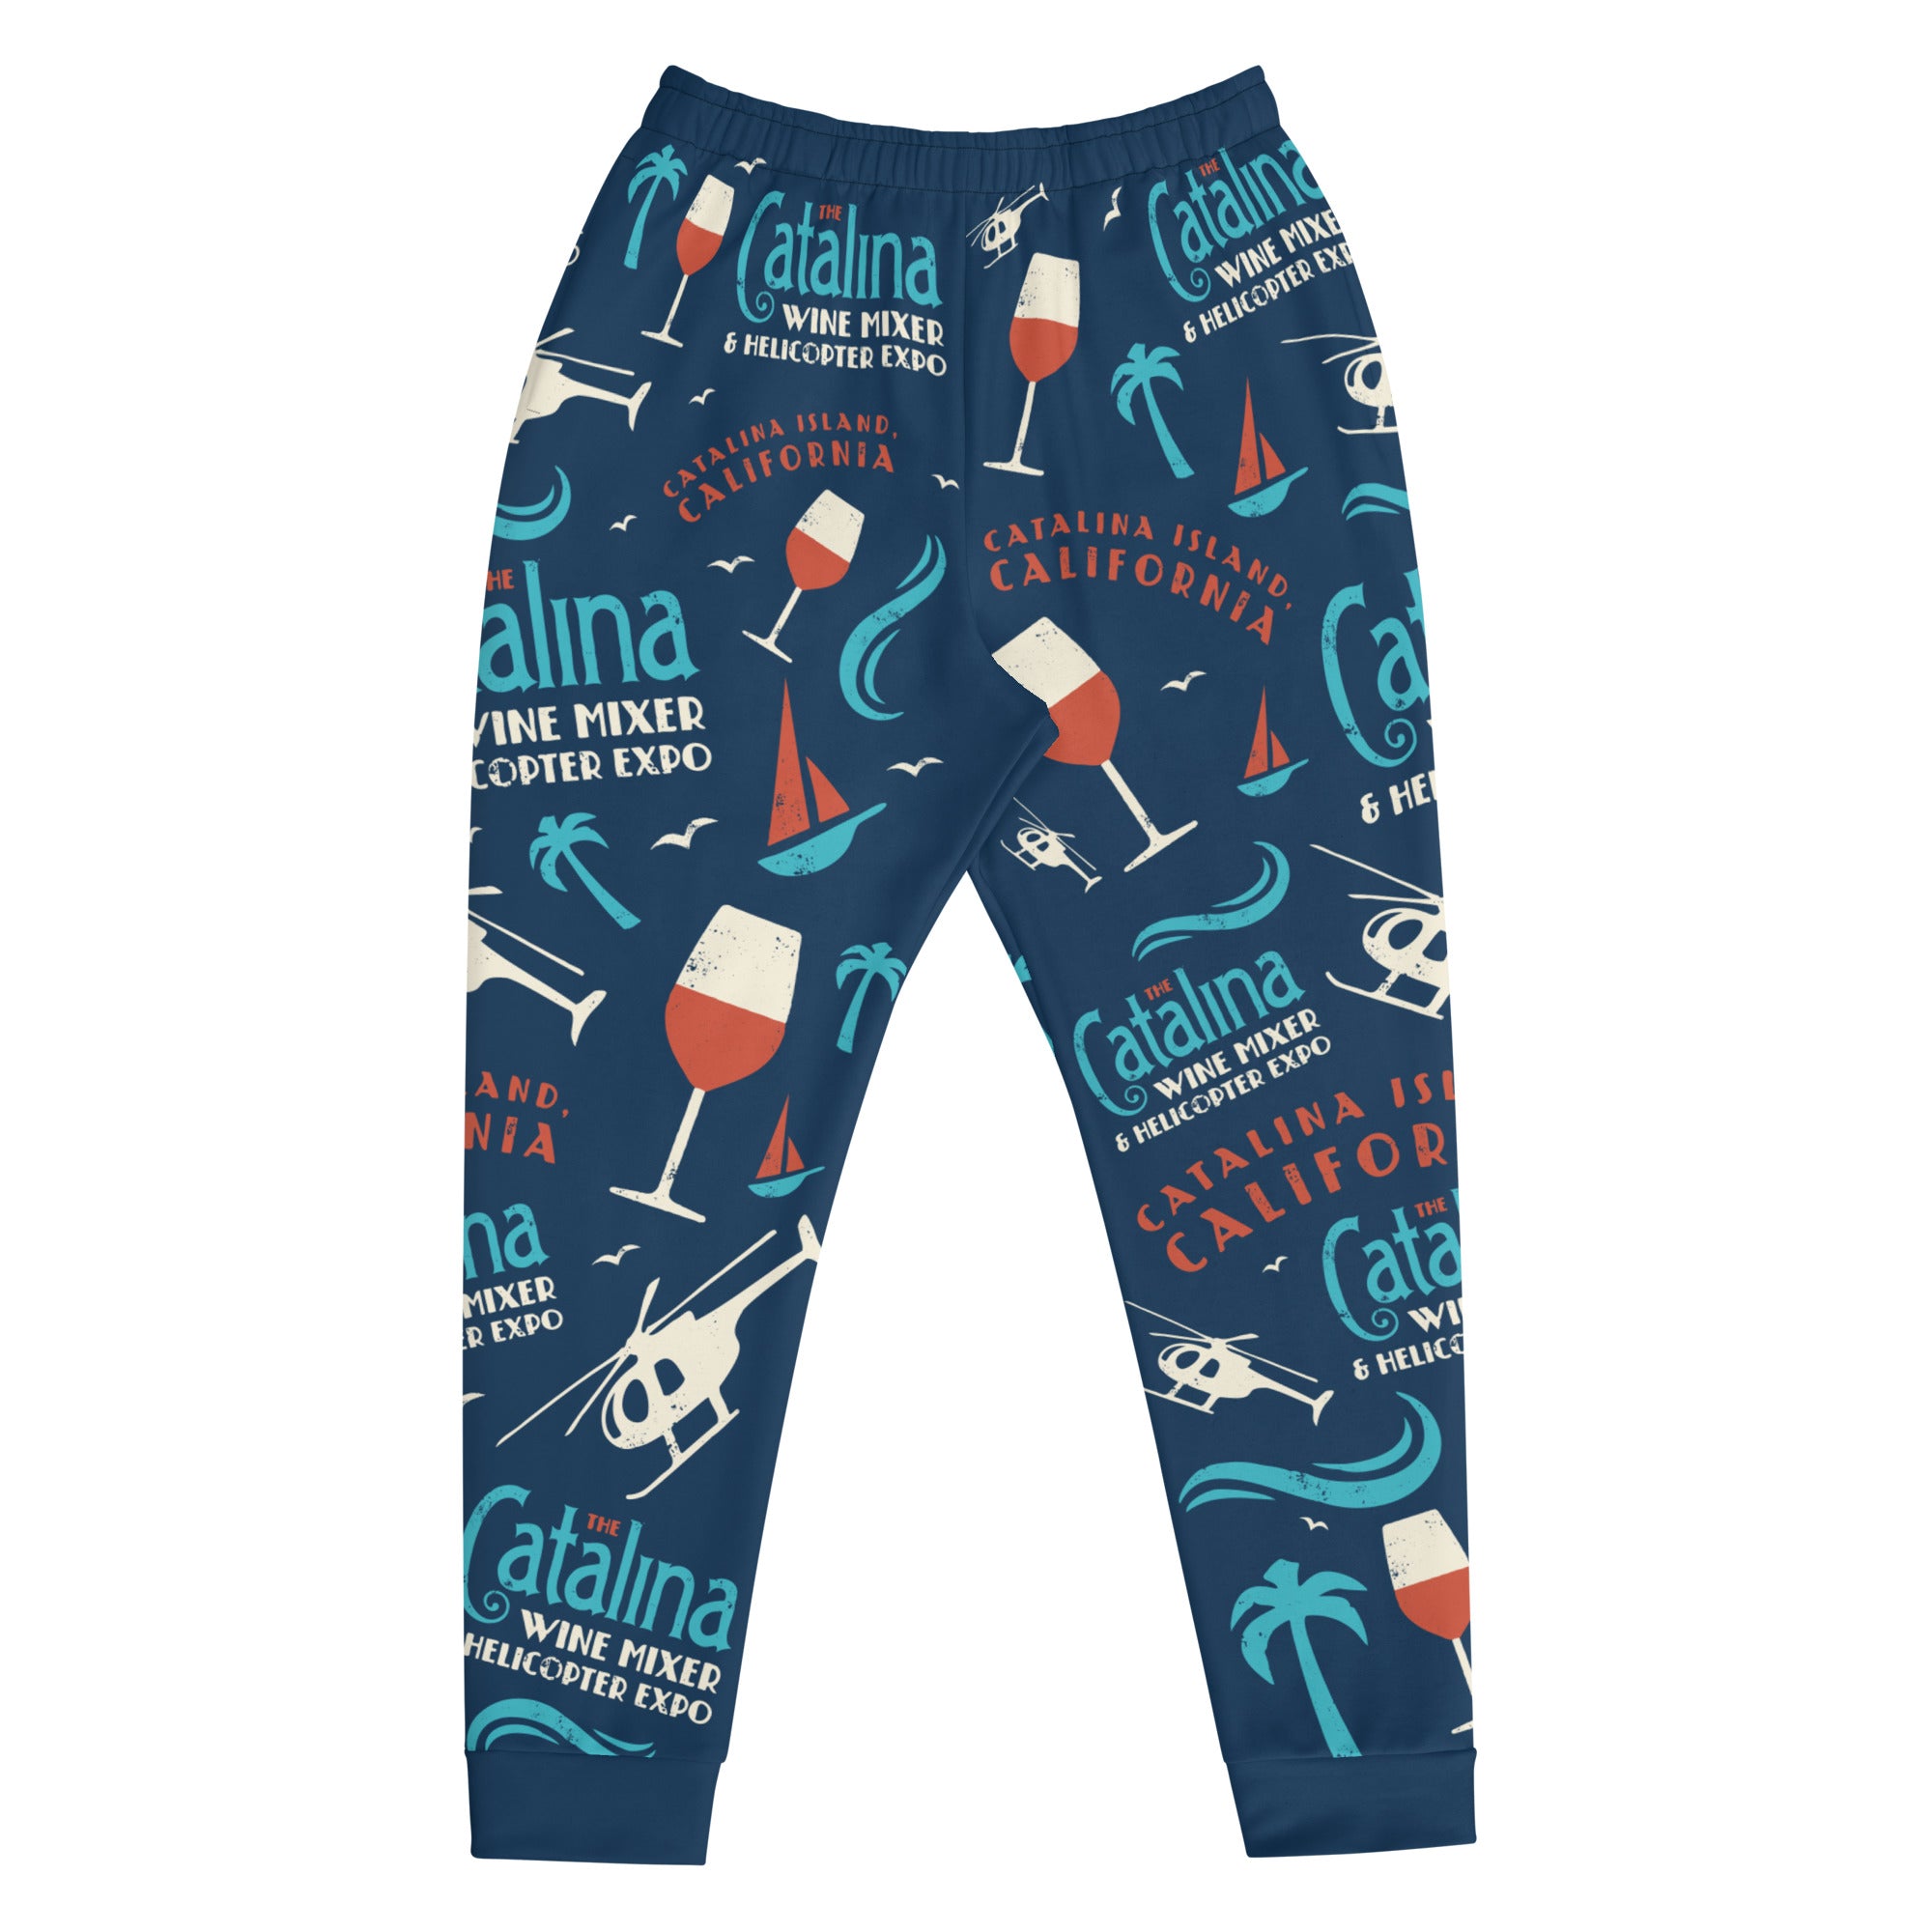 The Catalina Wine Mixer & Helicopter Expo - Pajama Lounge Pants